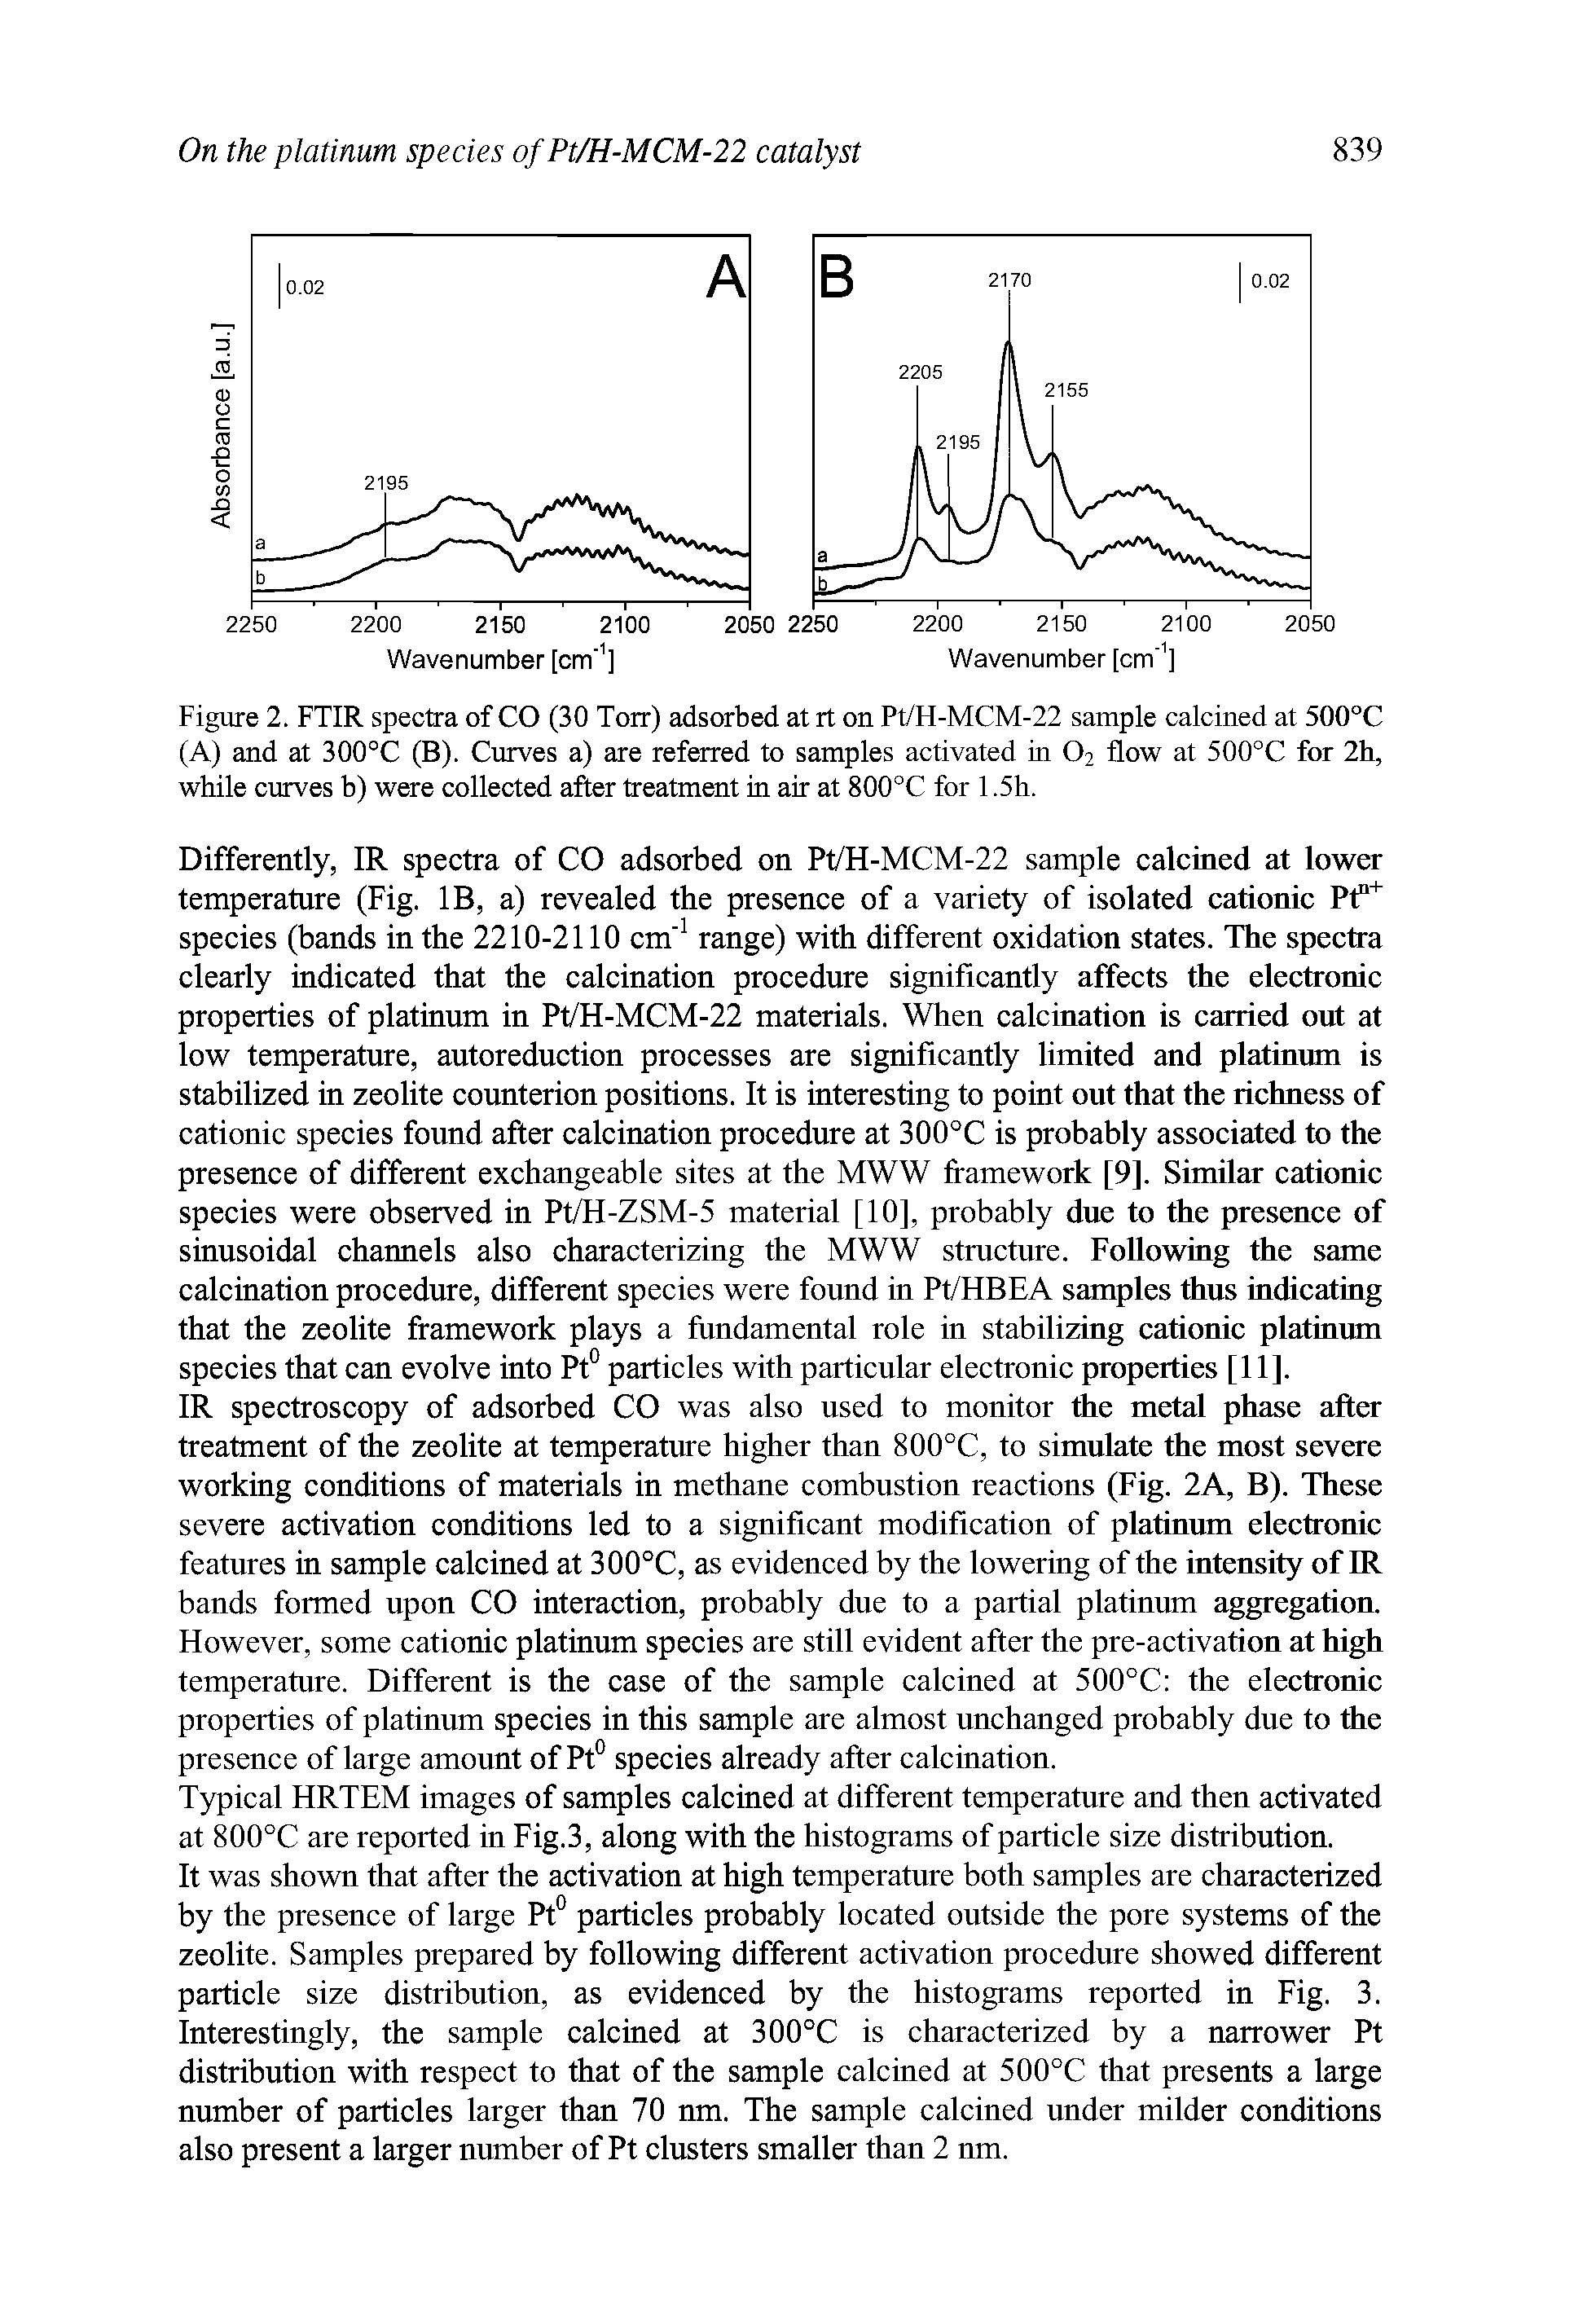 Figure 2. FTIR spectra of CO (30 Torr) adsorbed at rt on Pt/H-MCM-22 sample calcined at 500°C (A) and at 300°C (B). Curves a) are referred to samples activated in 02 flow at 500°C for 2h, while curves b) were collected after treatment in air at 800°C for 1,5h.